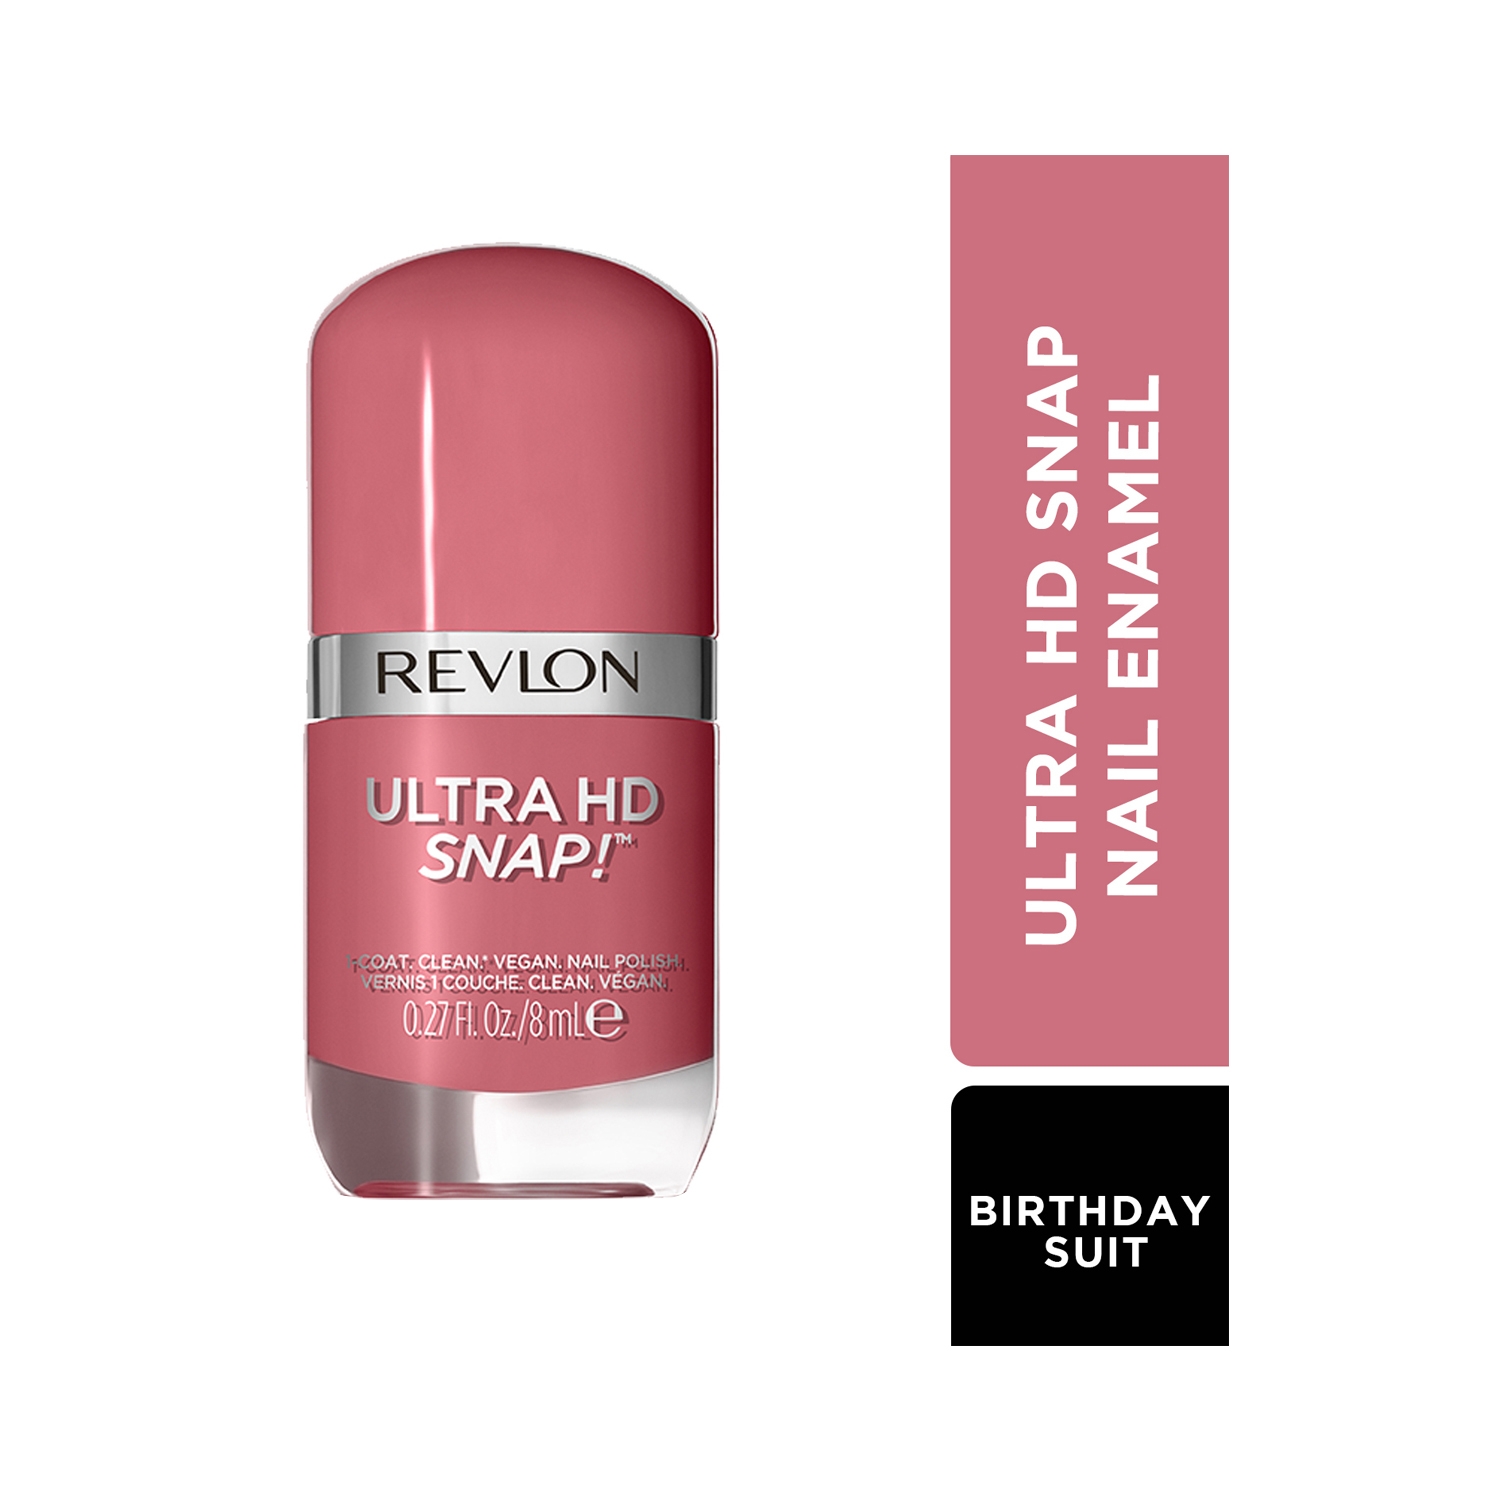 Revlon Ultra HD Snap! Play Boldly Collection - Spring 2022 - Janixa - Nail  - Lacquer Therapy - YouTube